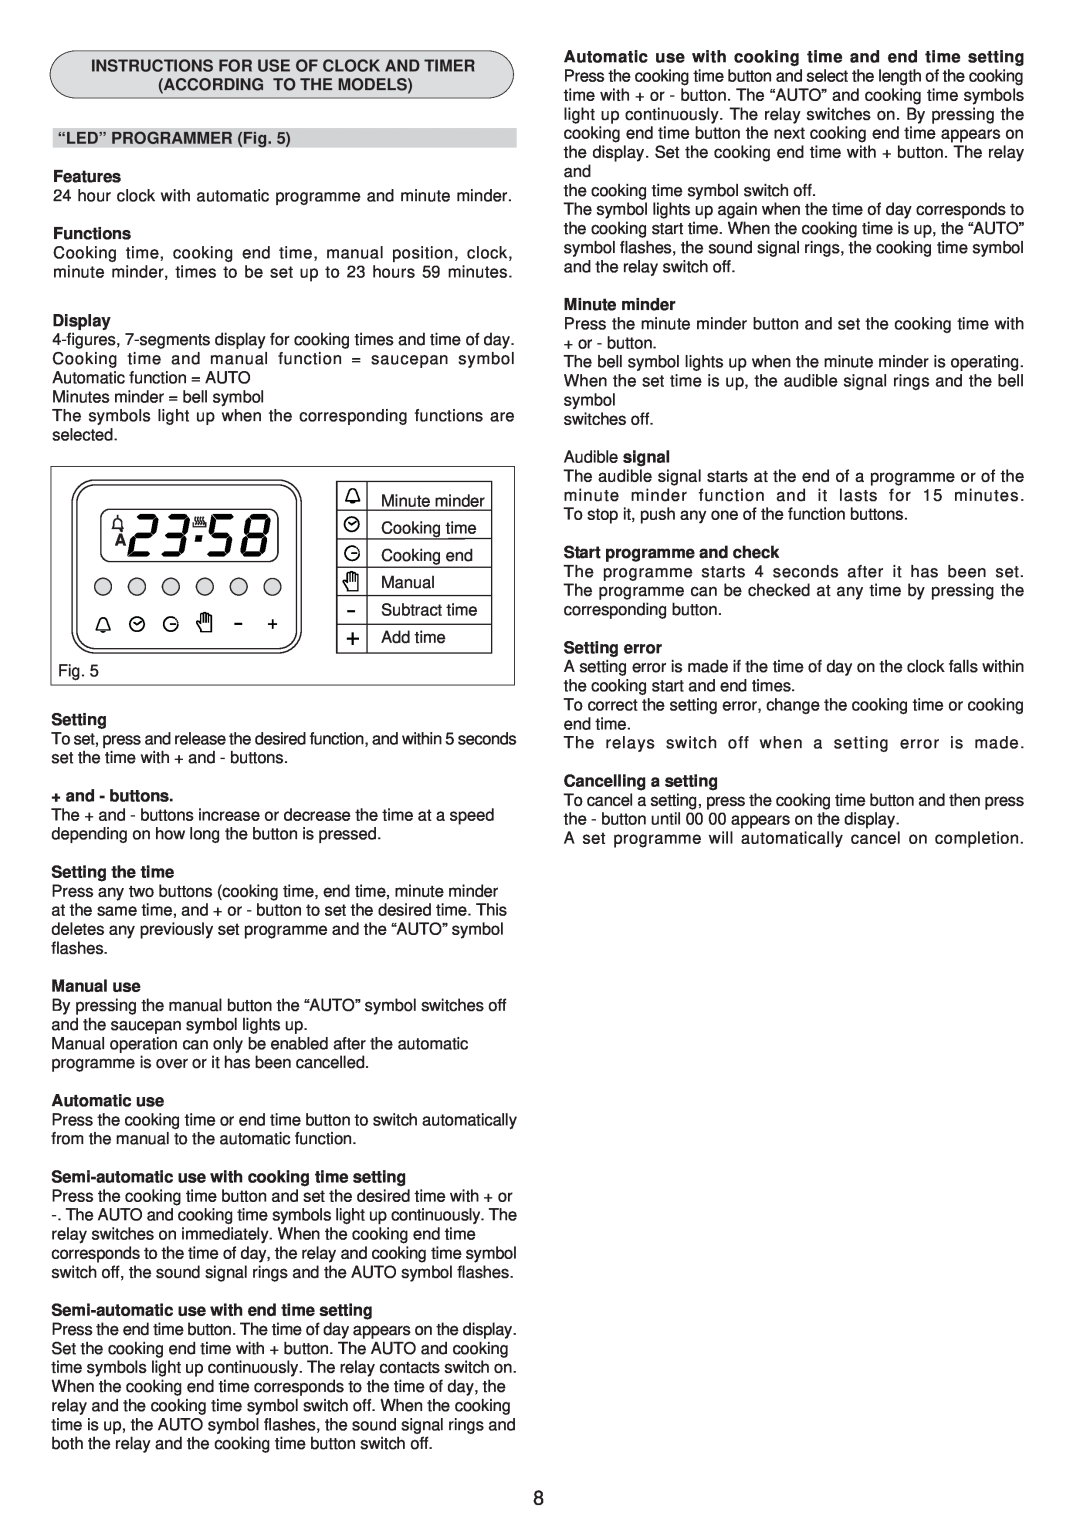 Zanussi ZCM 1031 X, ZCM 1030 X manual Instructions For Use Of Clock And Timer According To The Models 